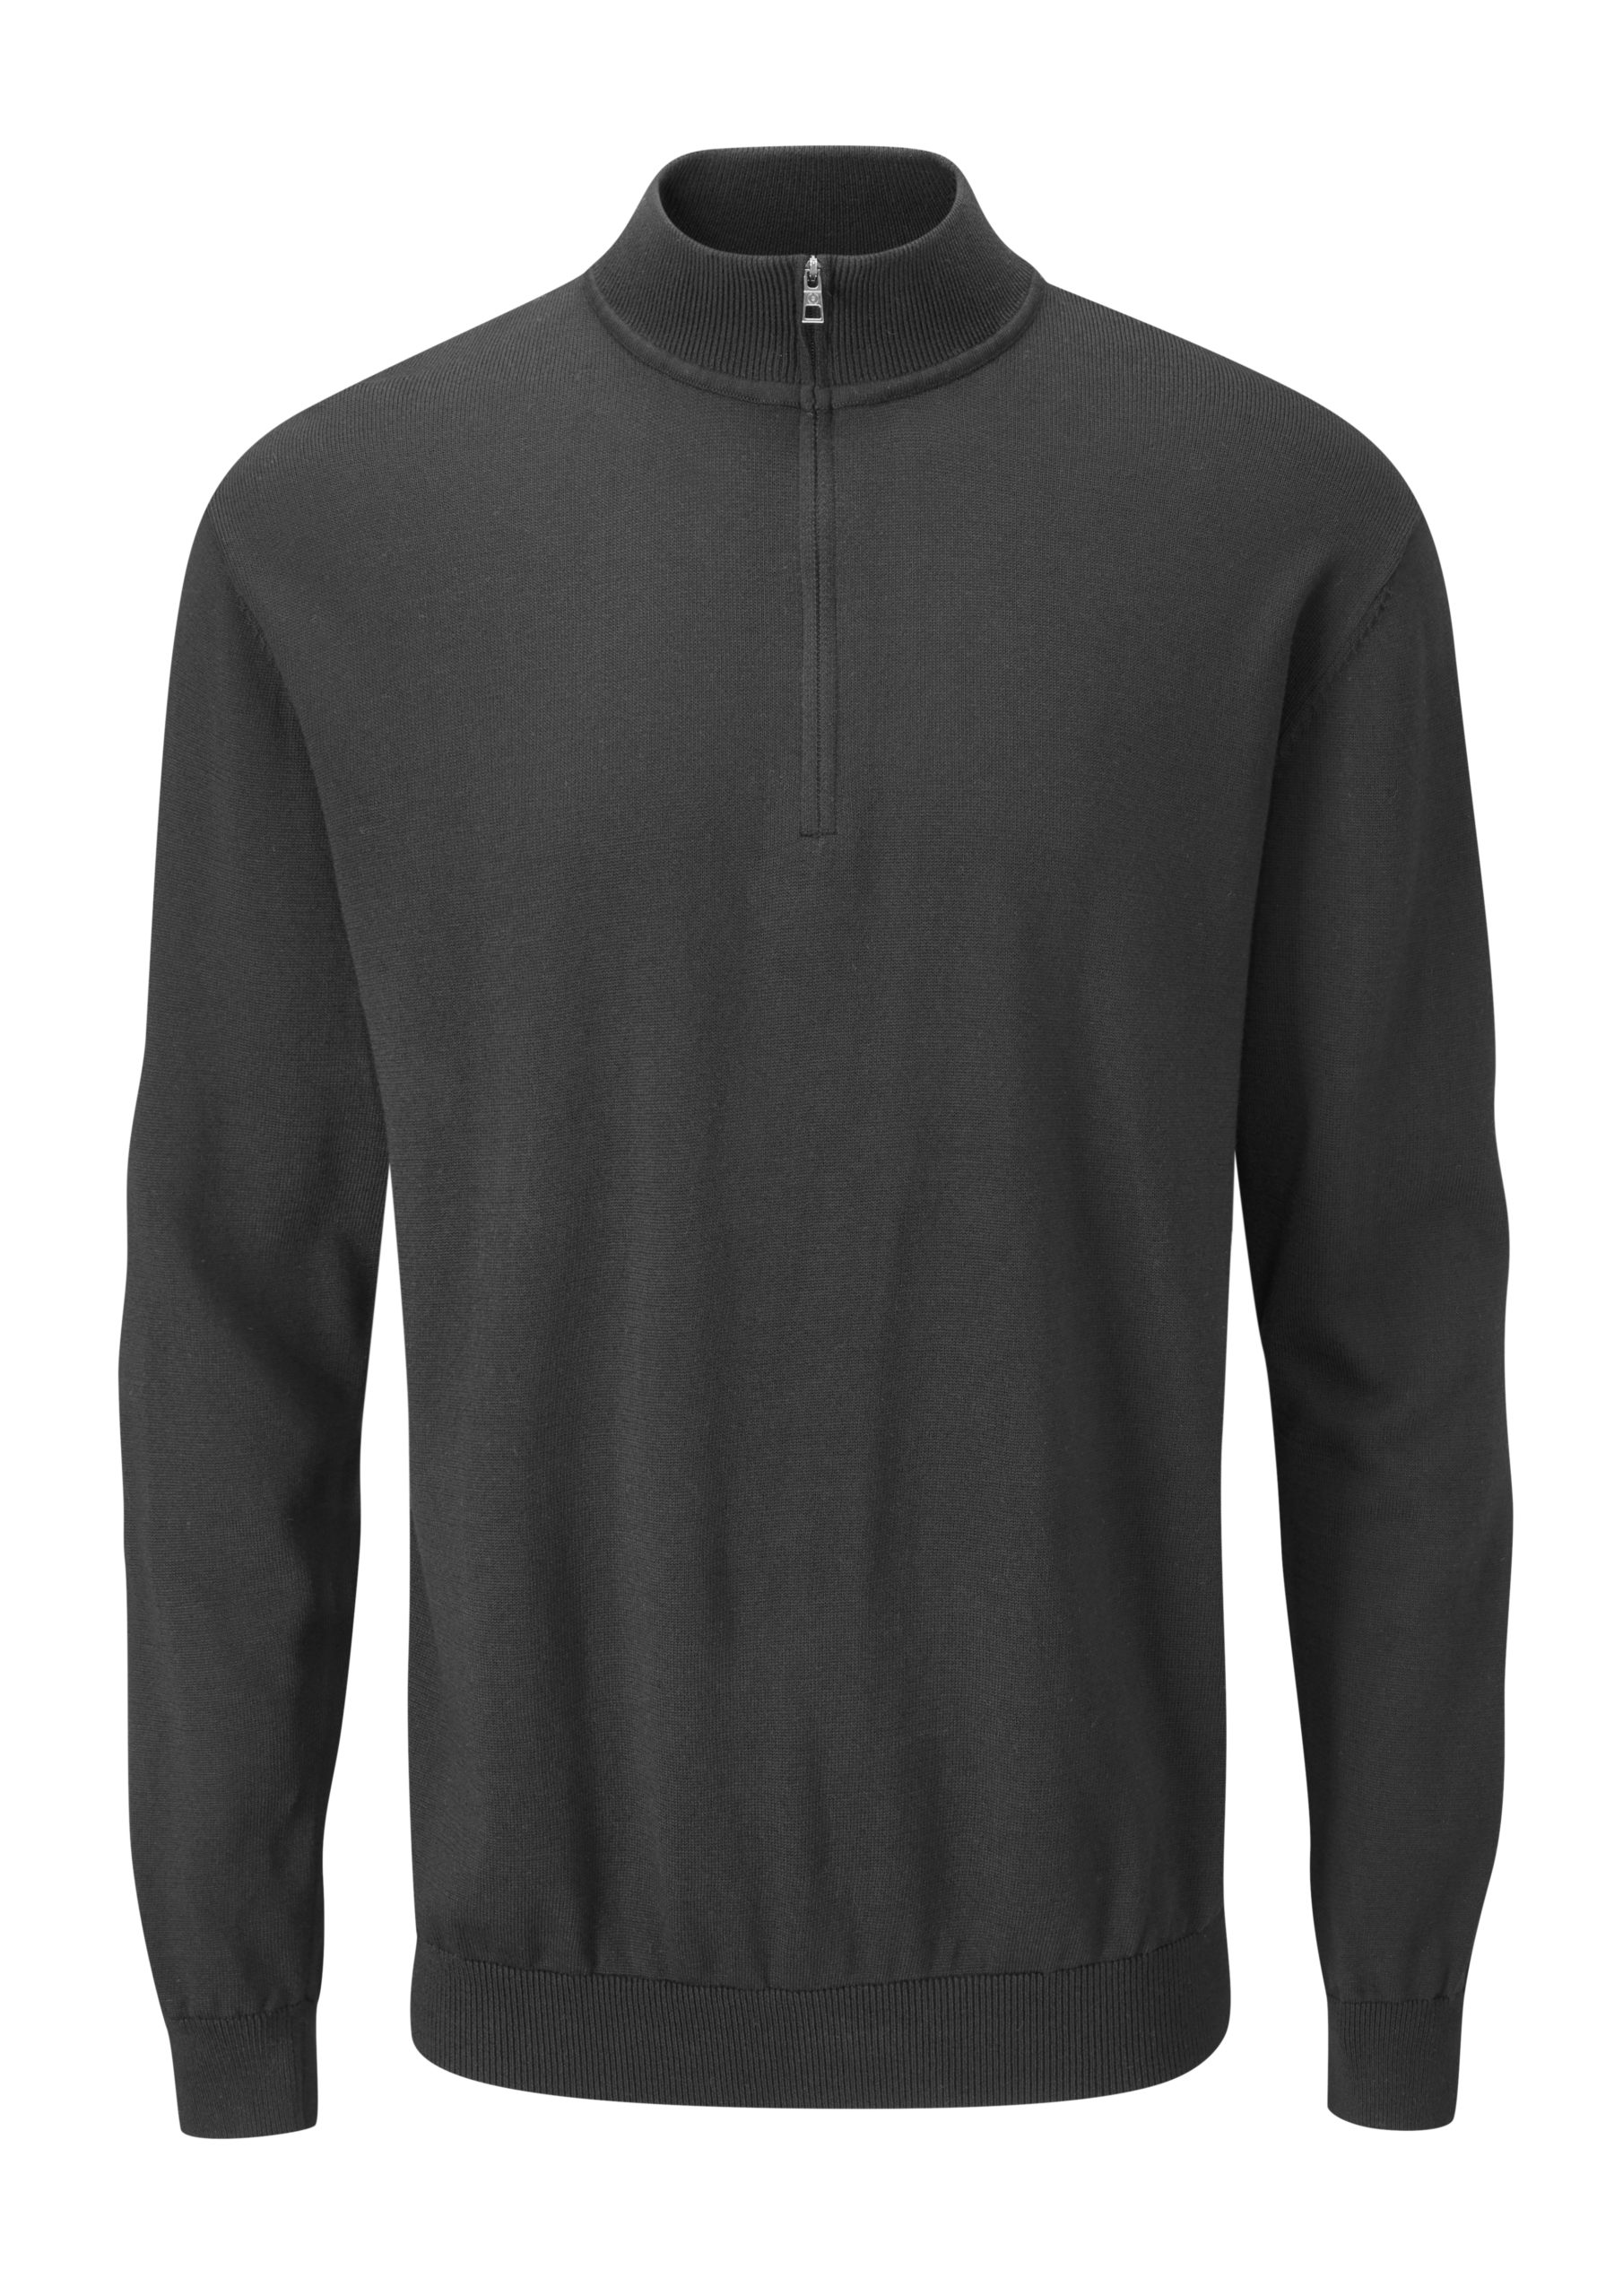 PING Couper Lined Sweater - MB Performance Golf